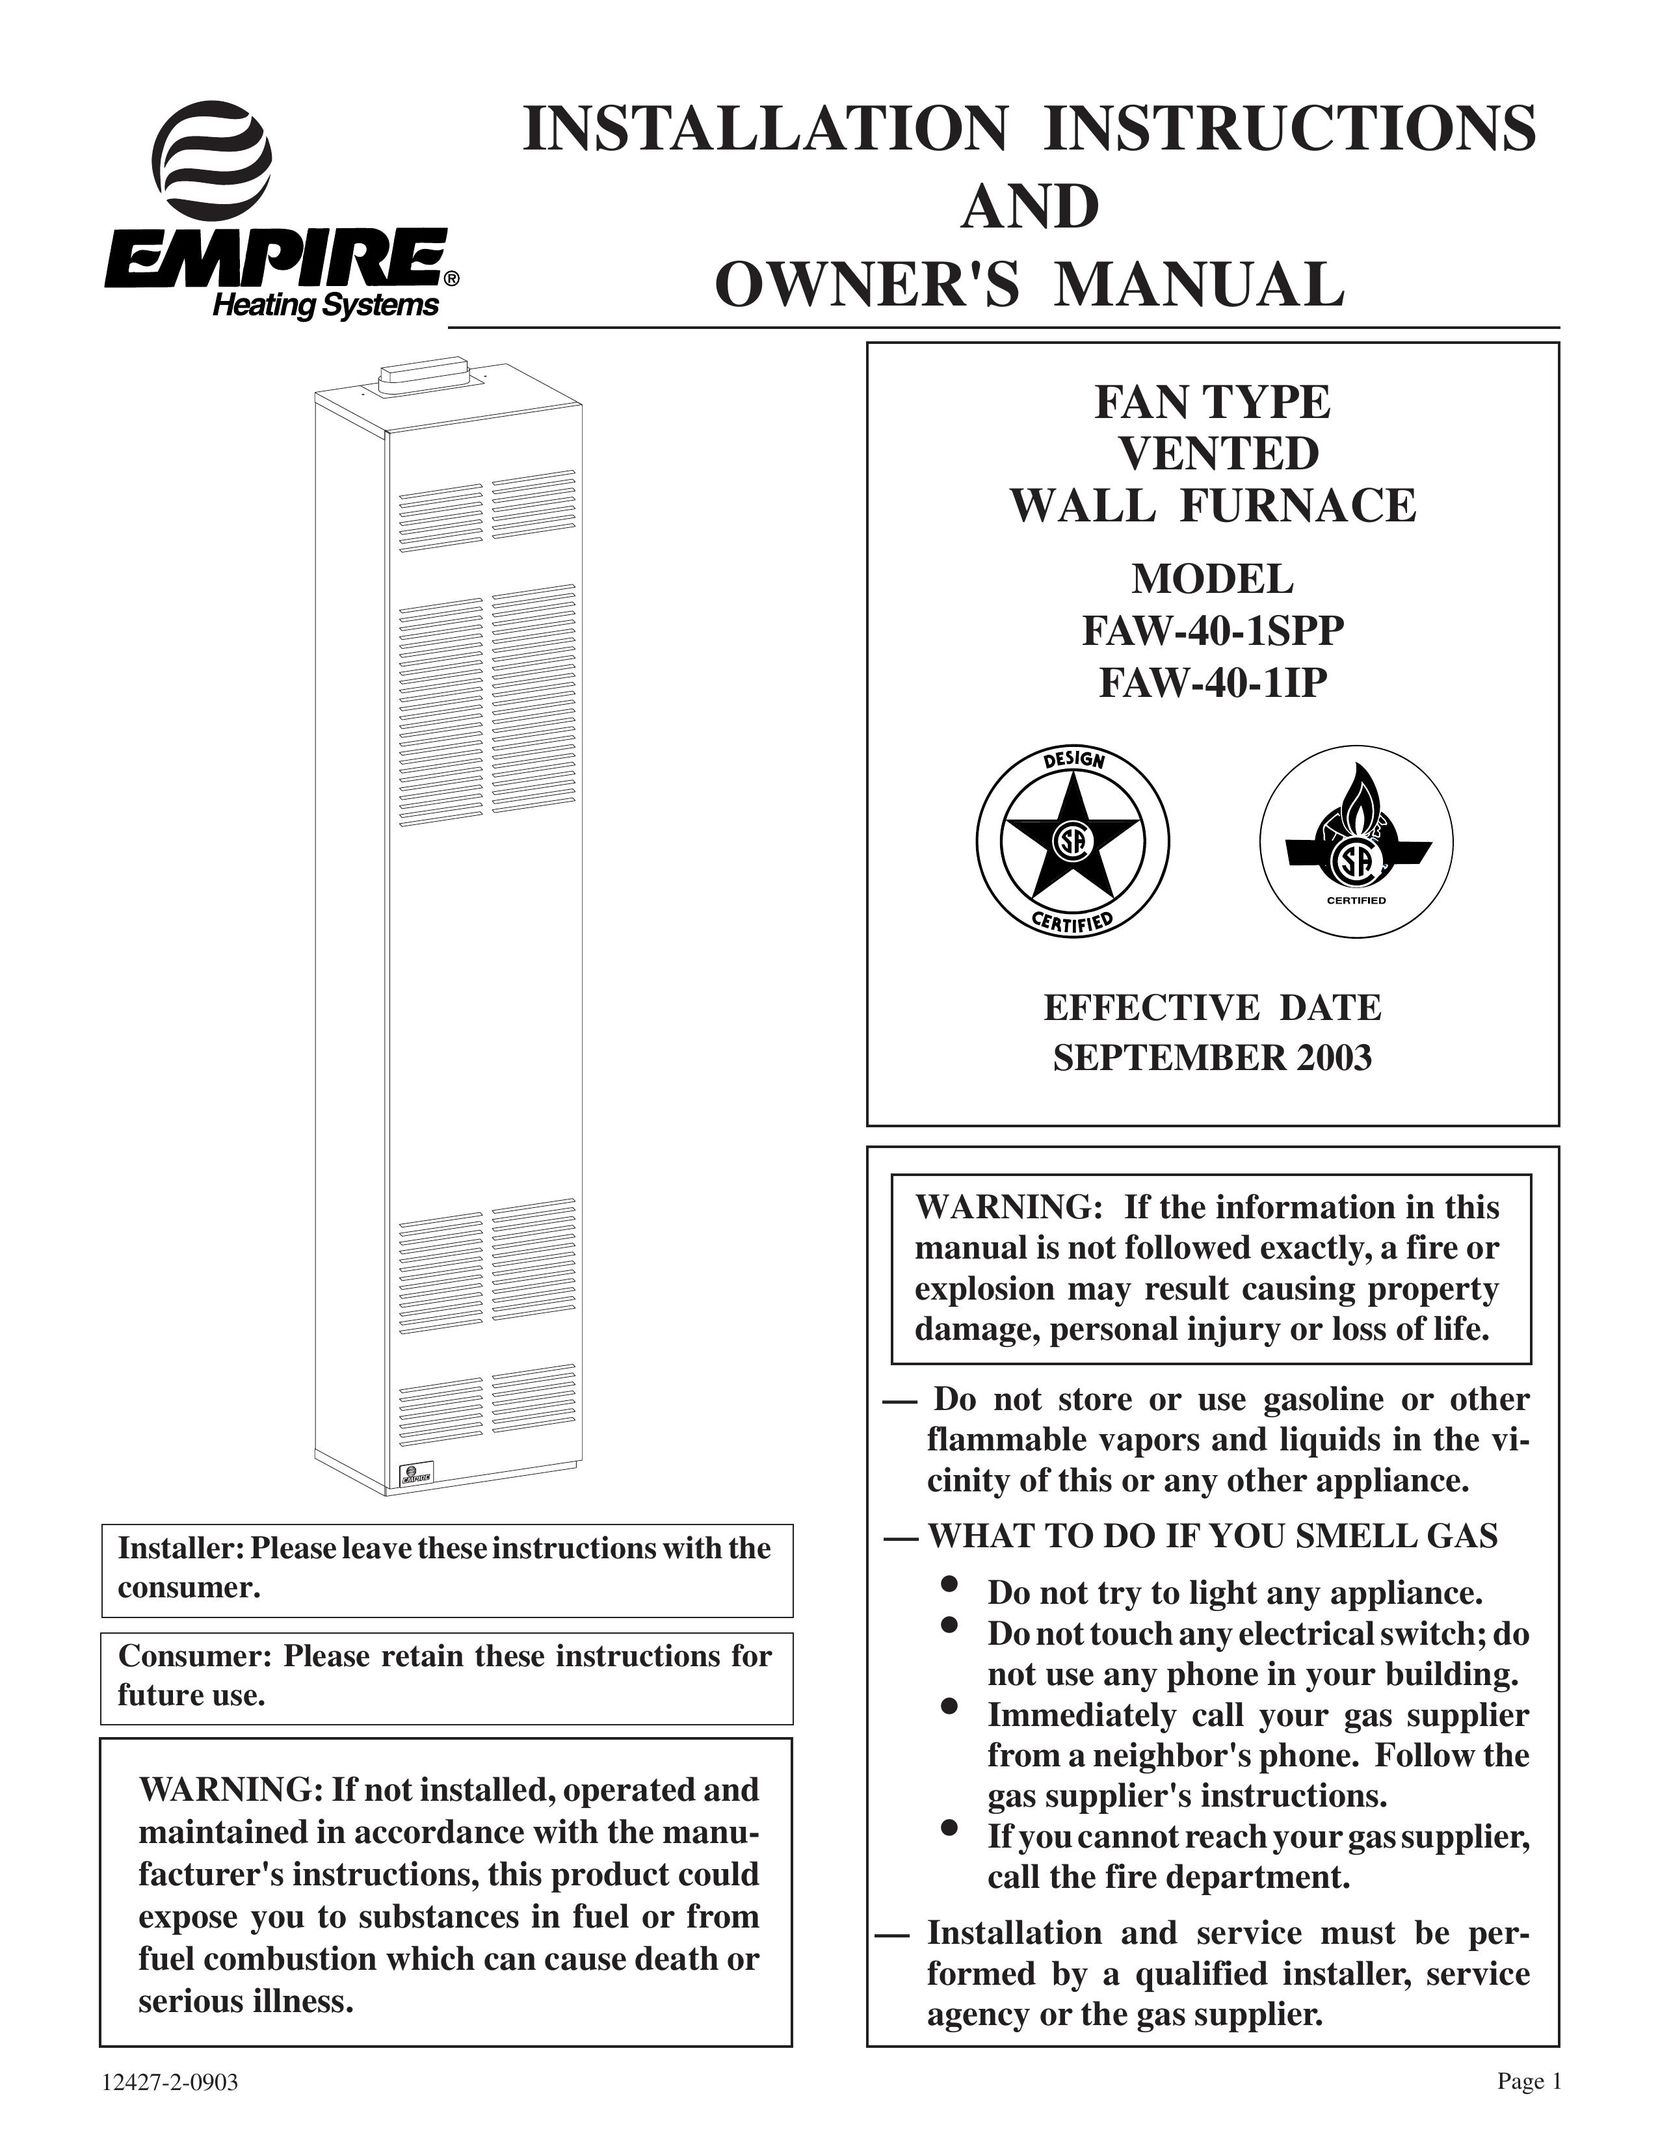 Empire Comfort Systems FAW-40-1SPP Furnace User Manual